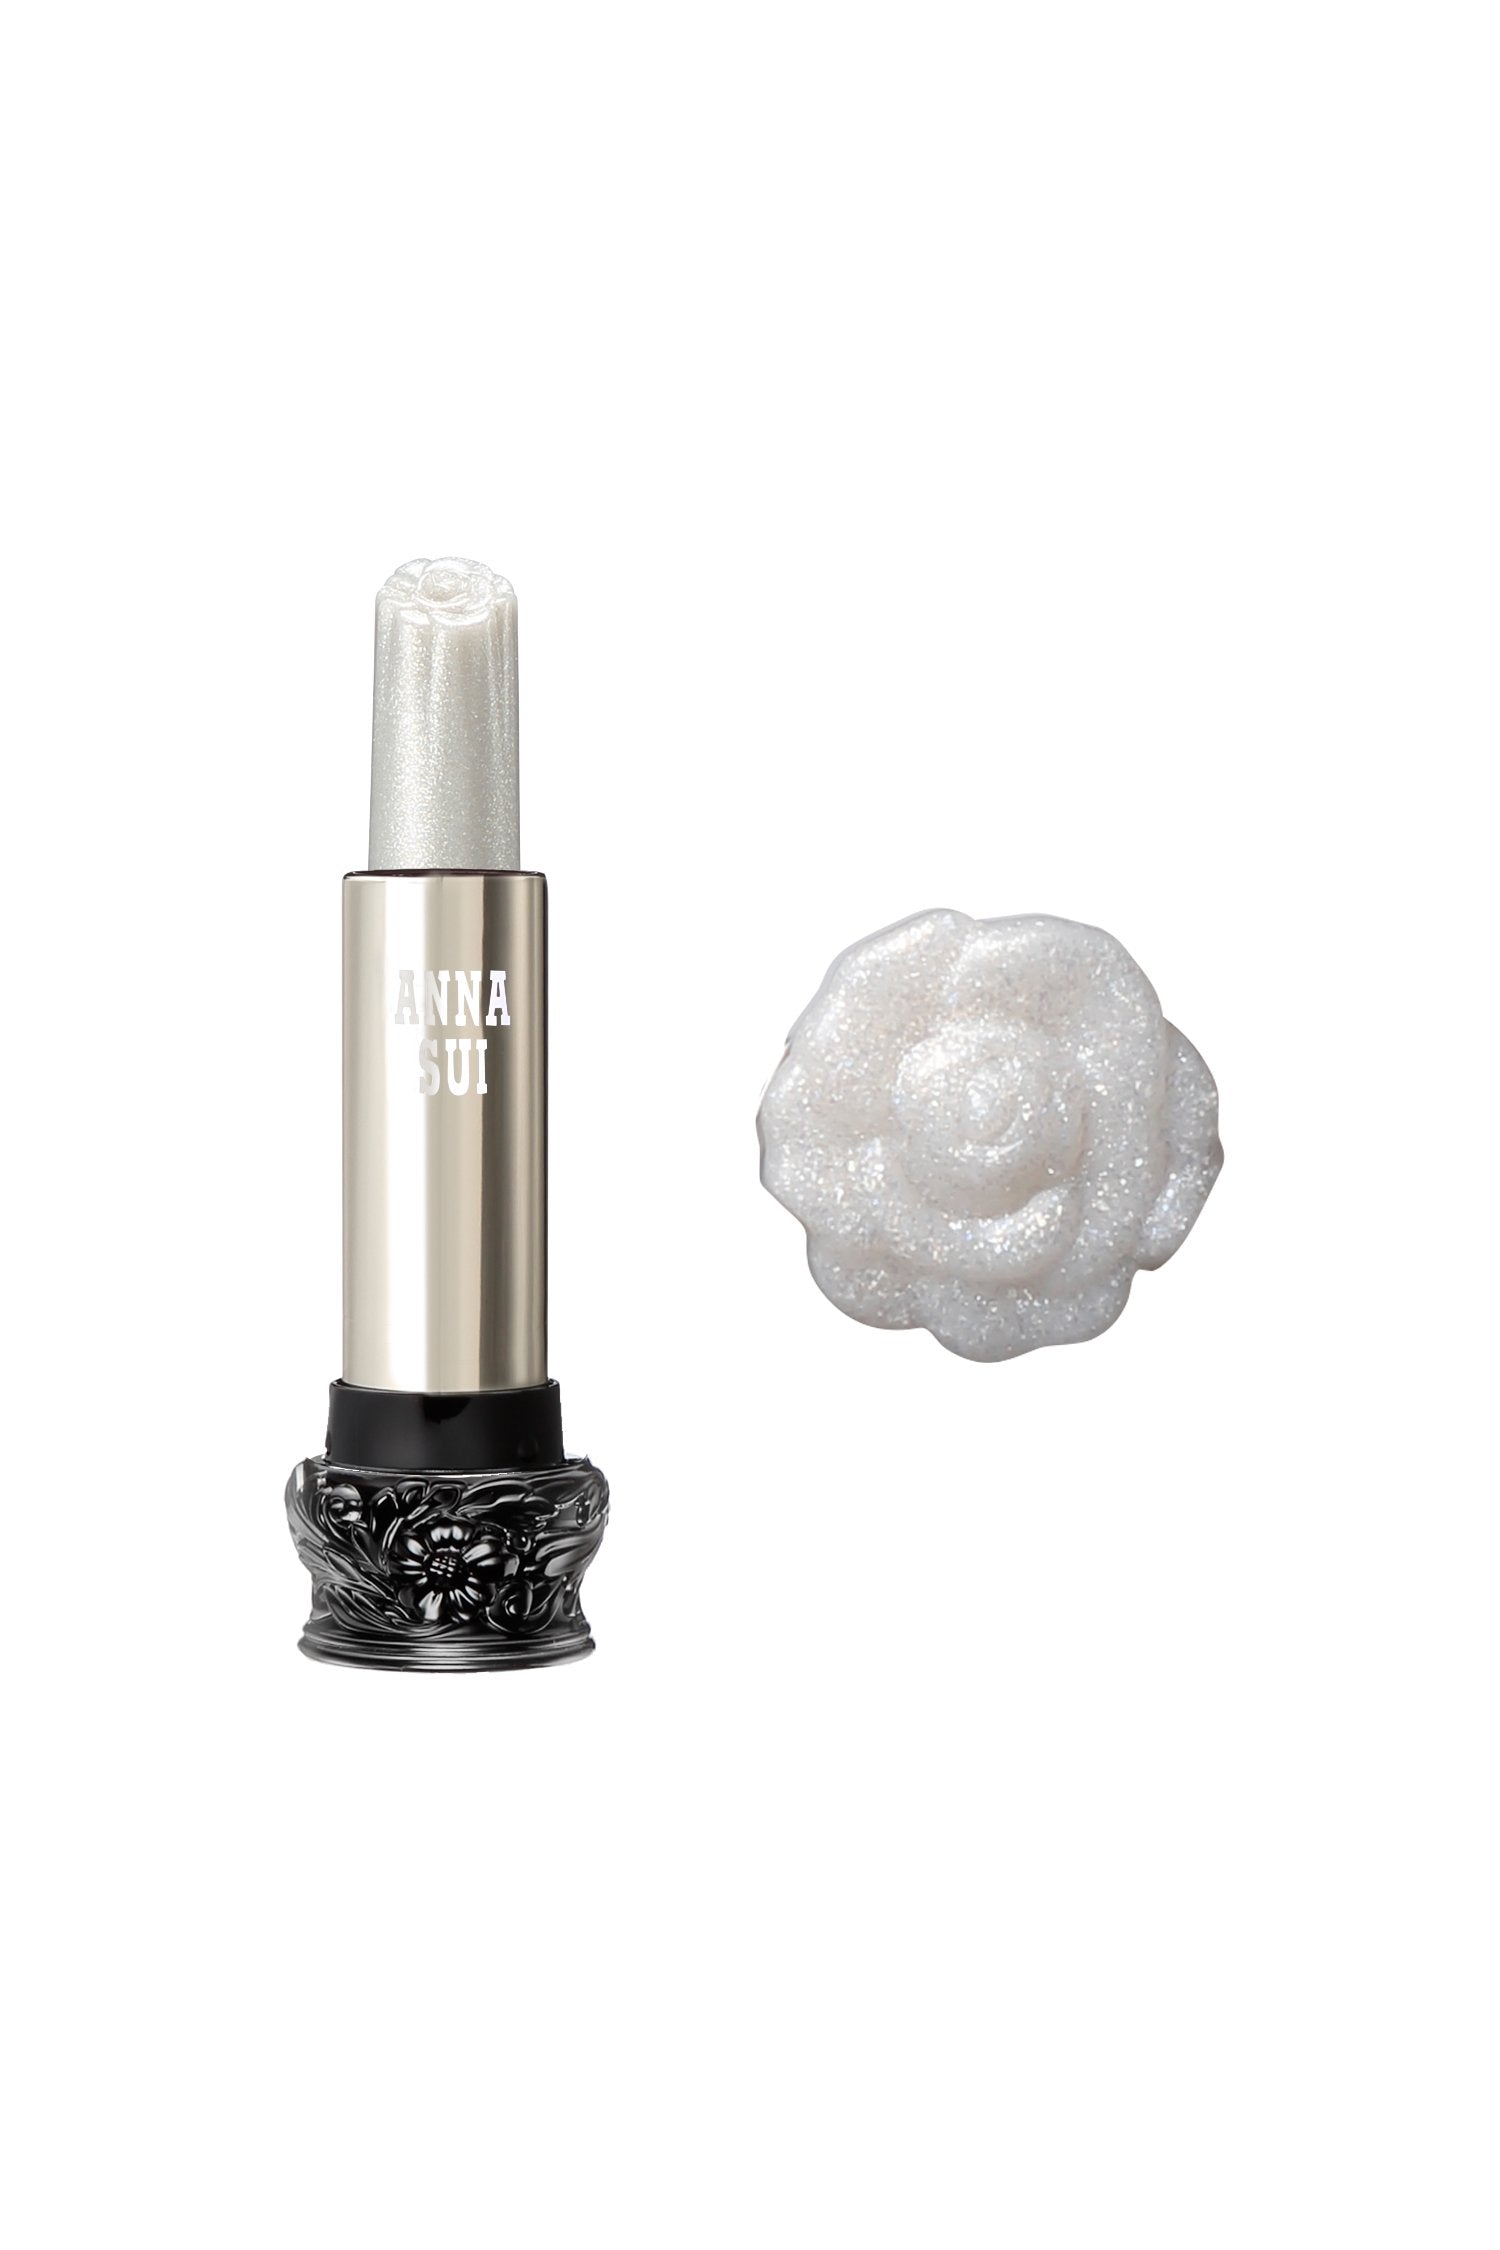 001 - Pearl White Daisy Lipstick S: Sheer Flower, cylindrical, large black base, engraved floral design, metallic body 